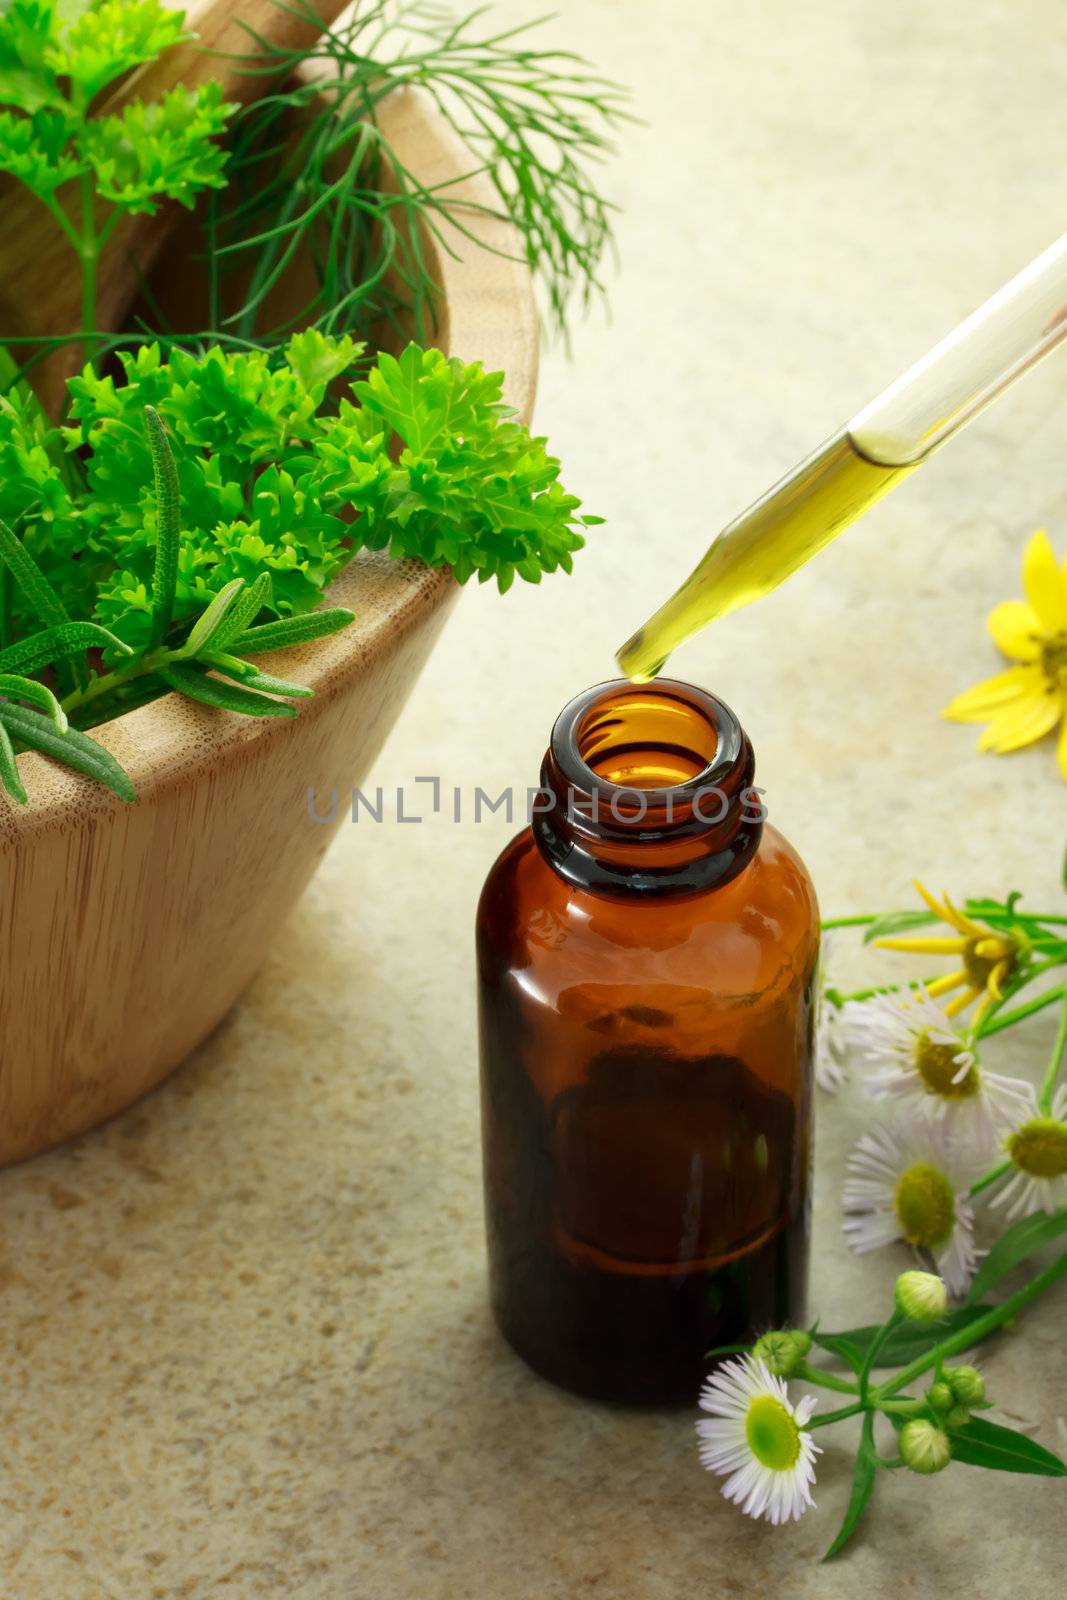 Herbal medicine with dropper bottle and wild flowers